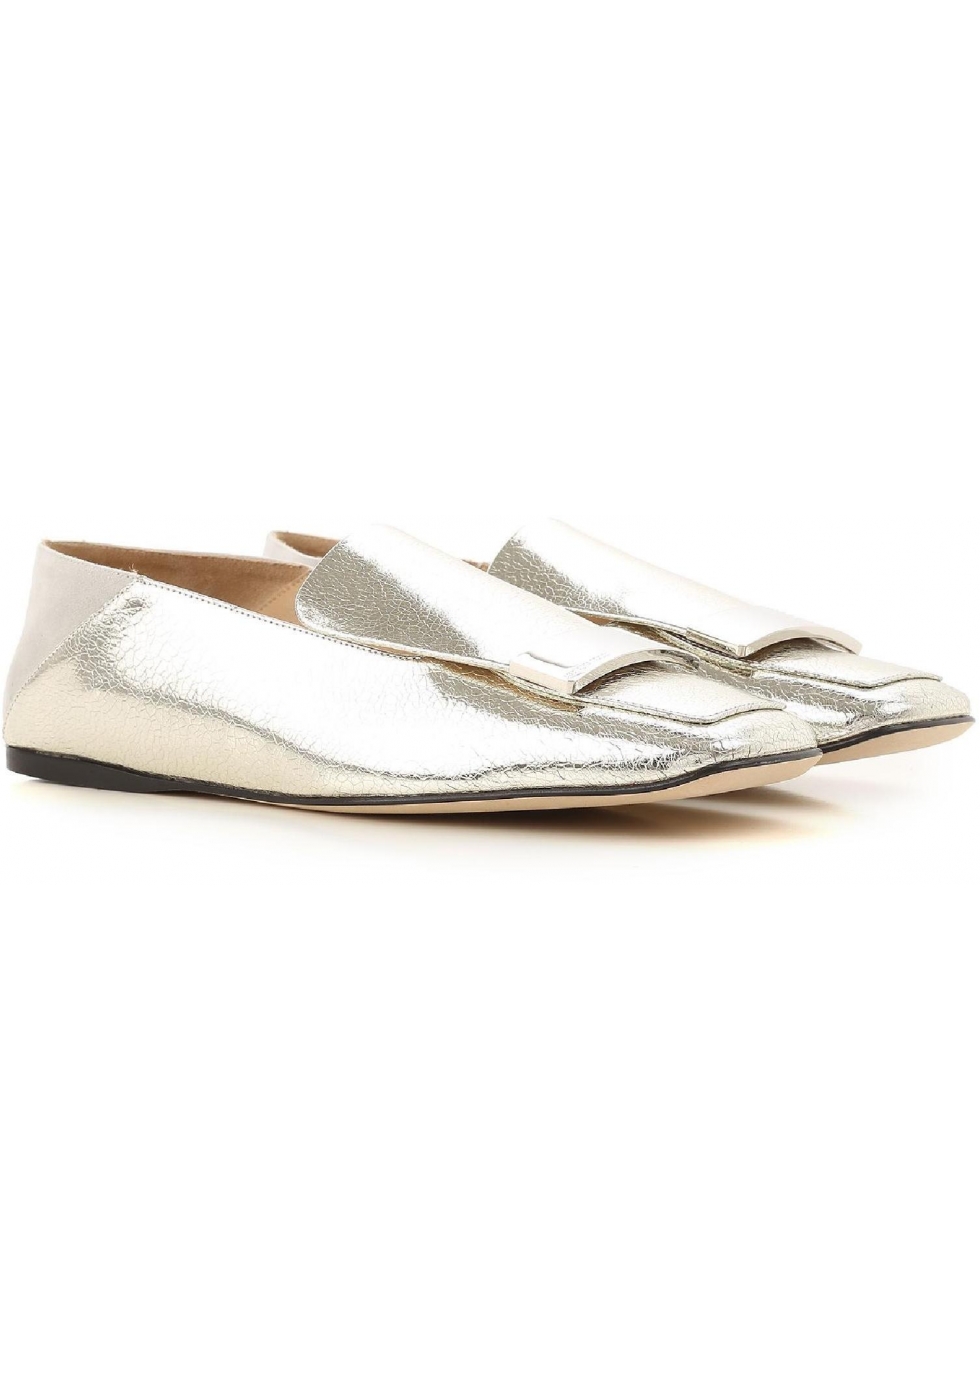 Sergio Rossi flats loafers in laminated silver leather - Italian Boutique